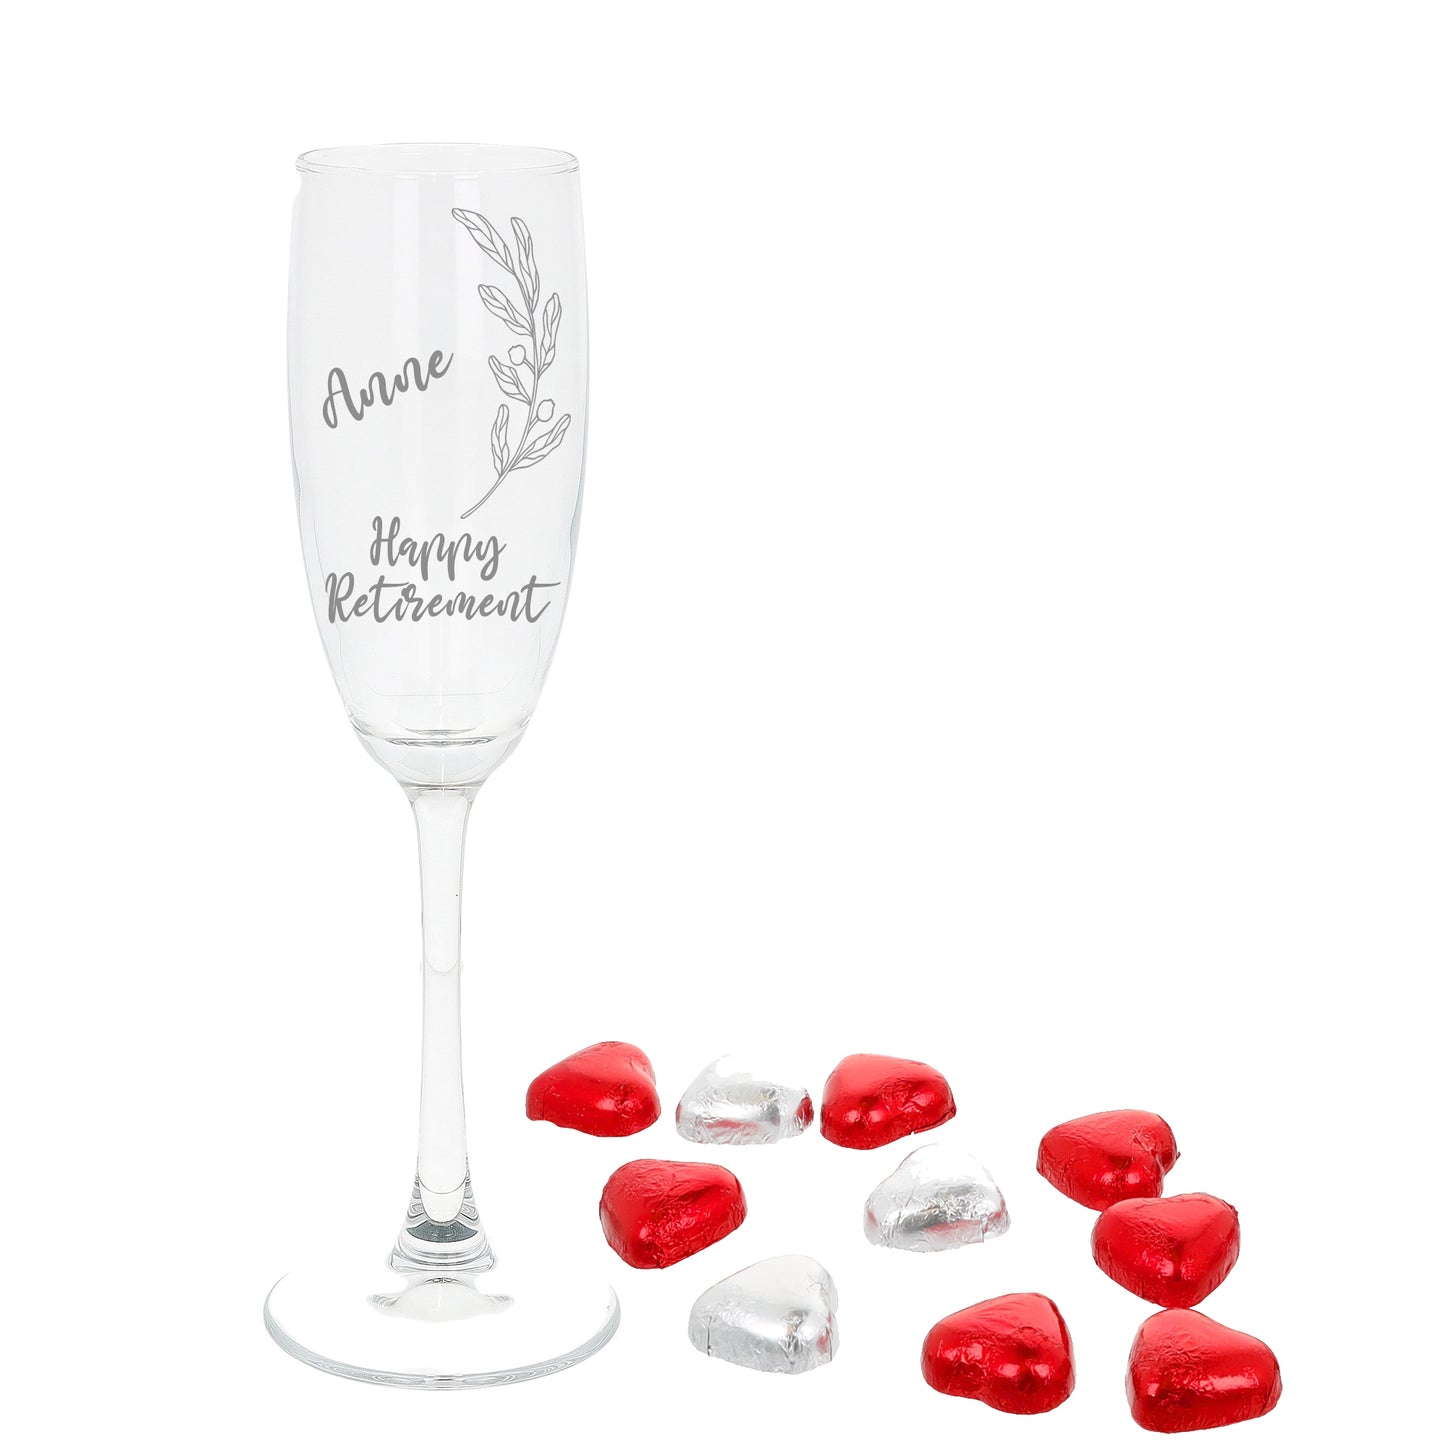 Personalised Engraved Retirement Champagne Glass Gift  - Always Looking Good - Filled- Heart Chocolates  